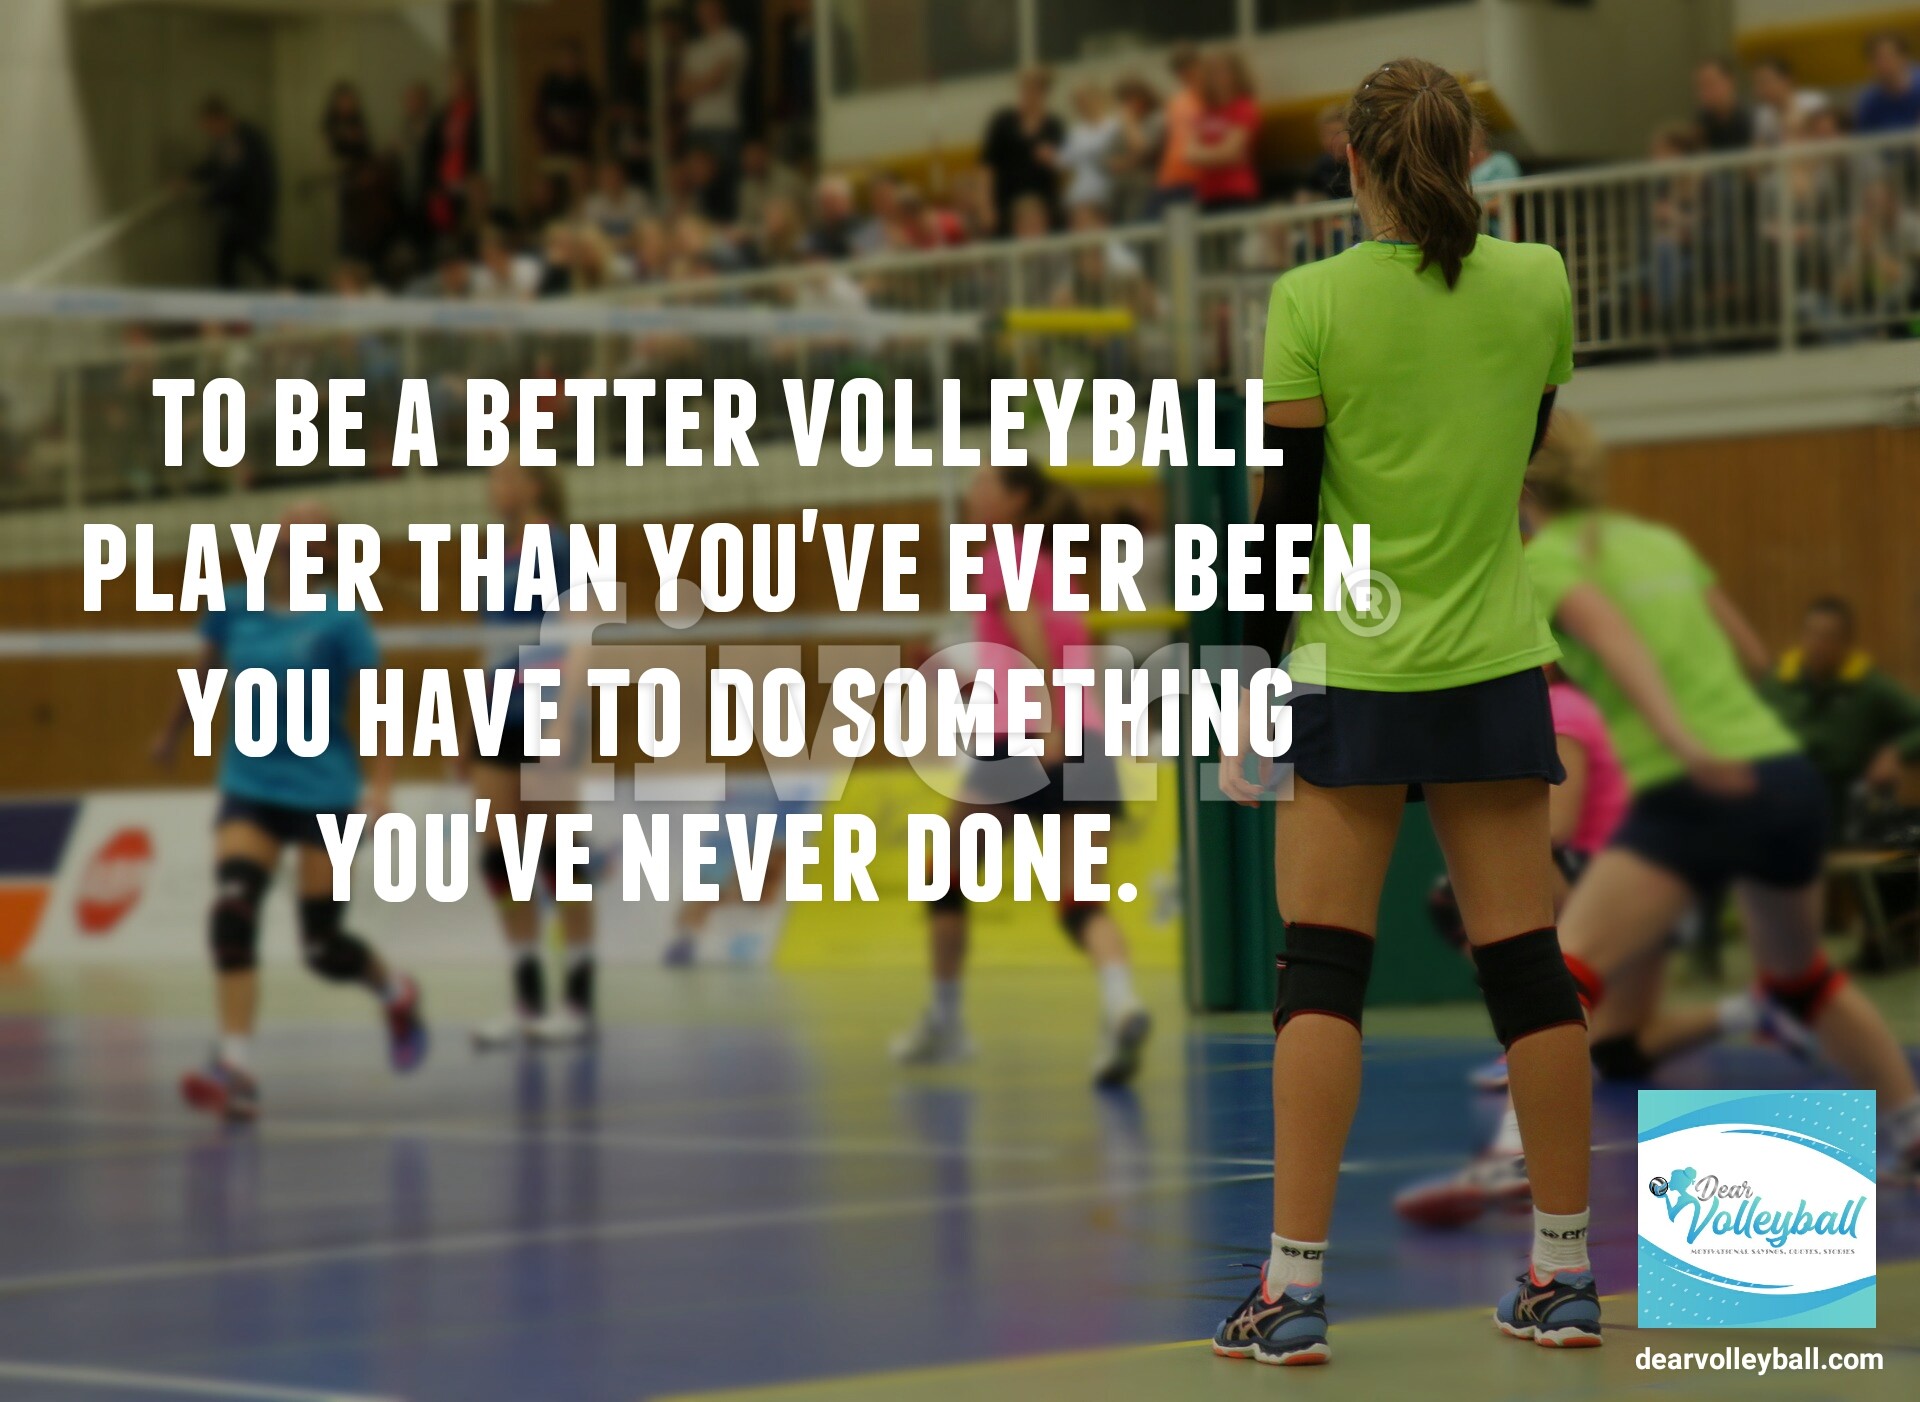 37 Volleyball Motivational Quotes and Images That Inspire Success